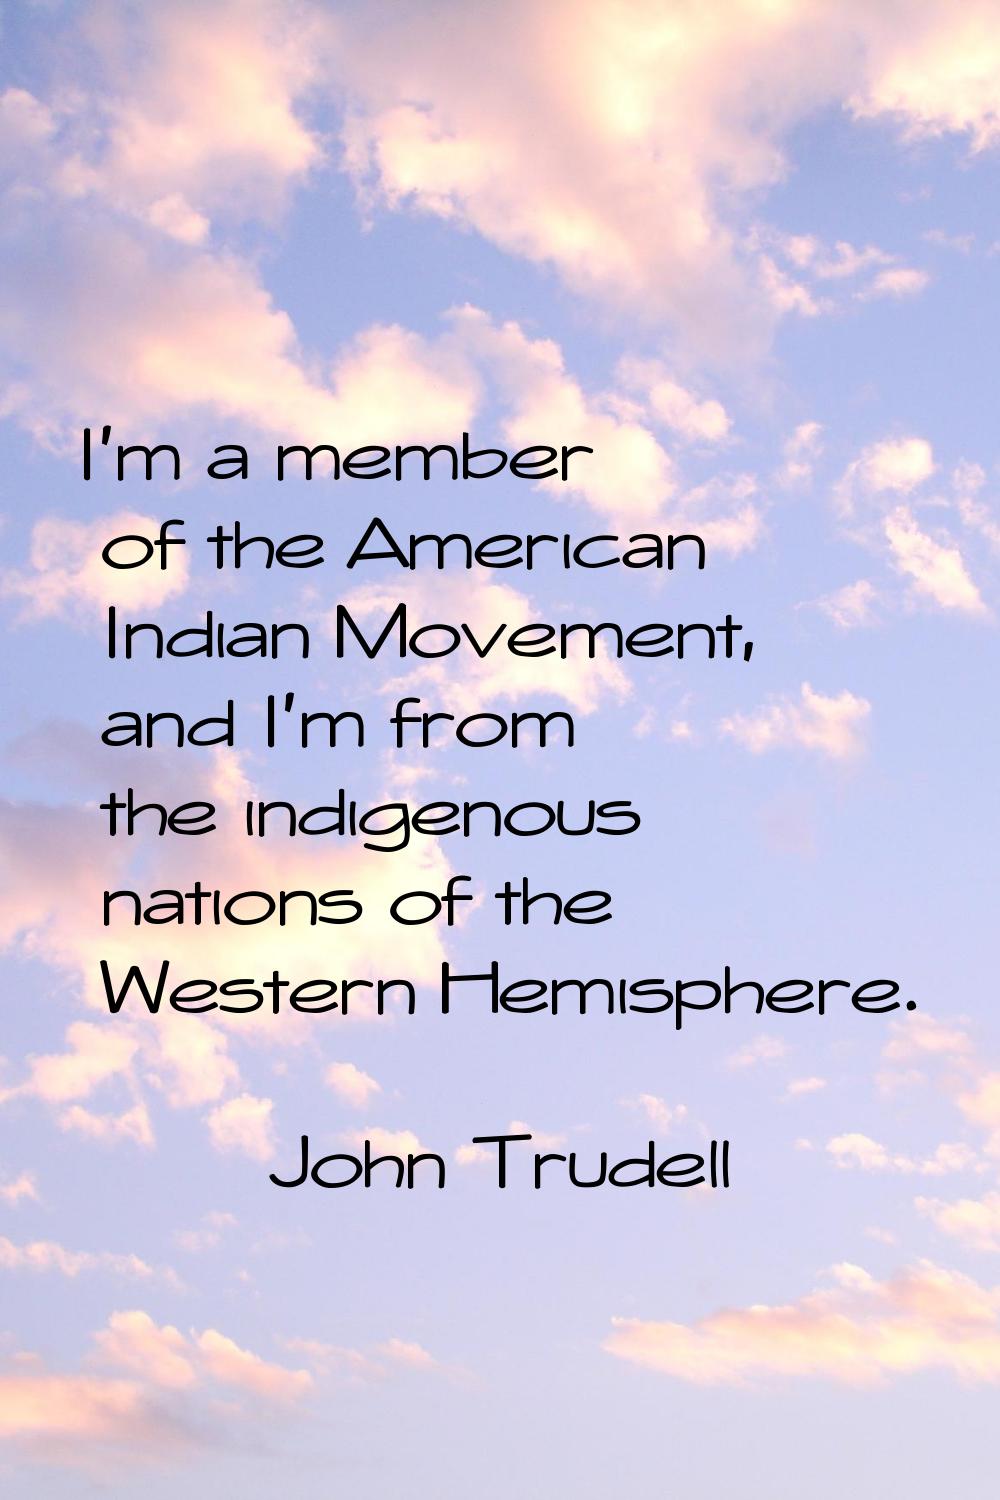 I'm a member of the American Indian Movement, and I'm from the indigenous nations of the Western He